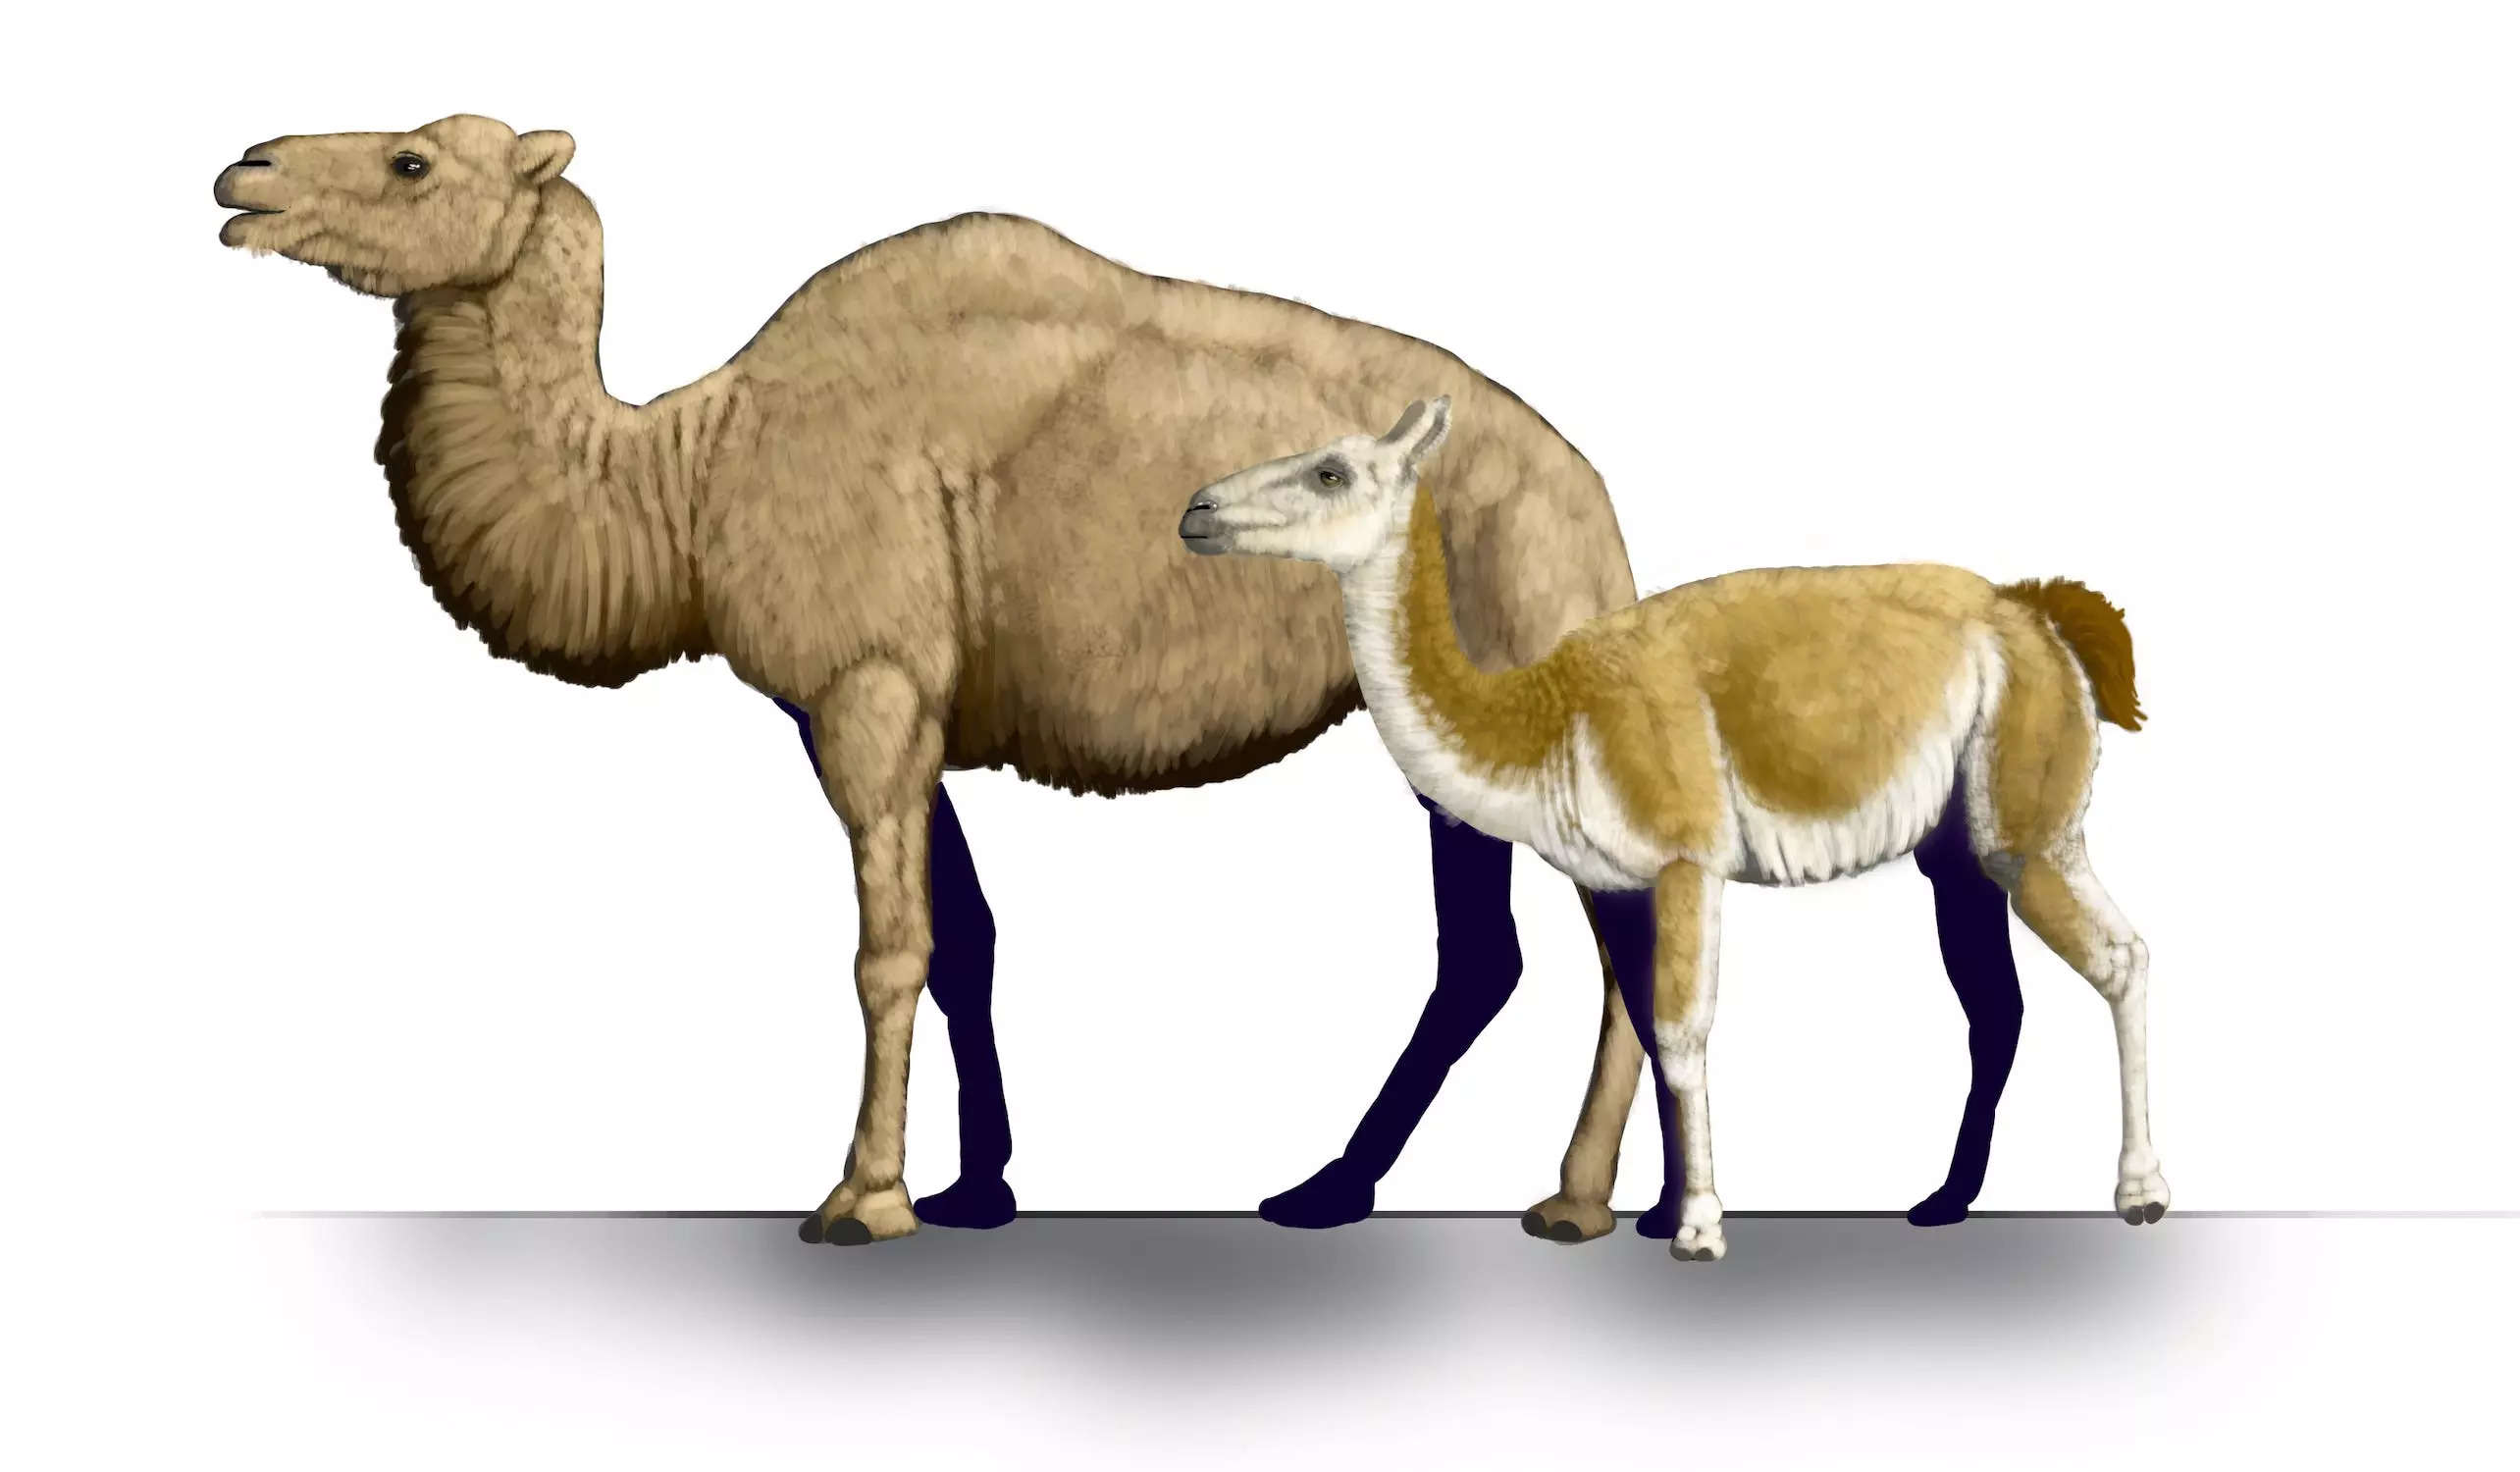 Camelops and Hemiauchenia are shown next to each other in an artist